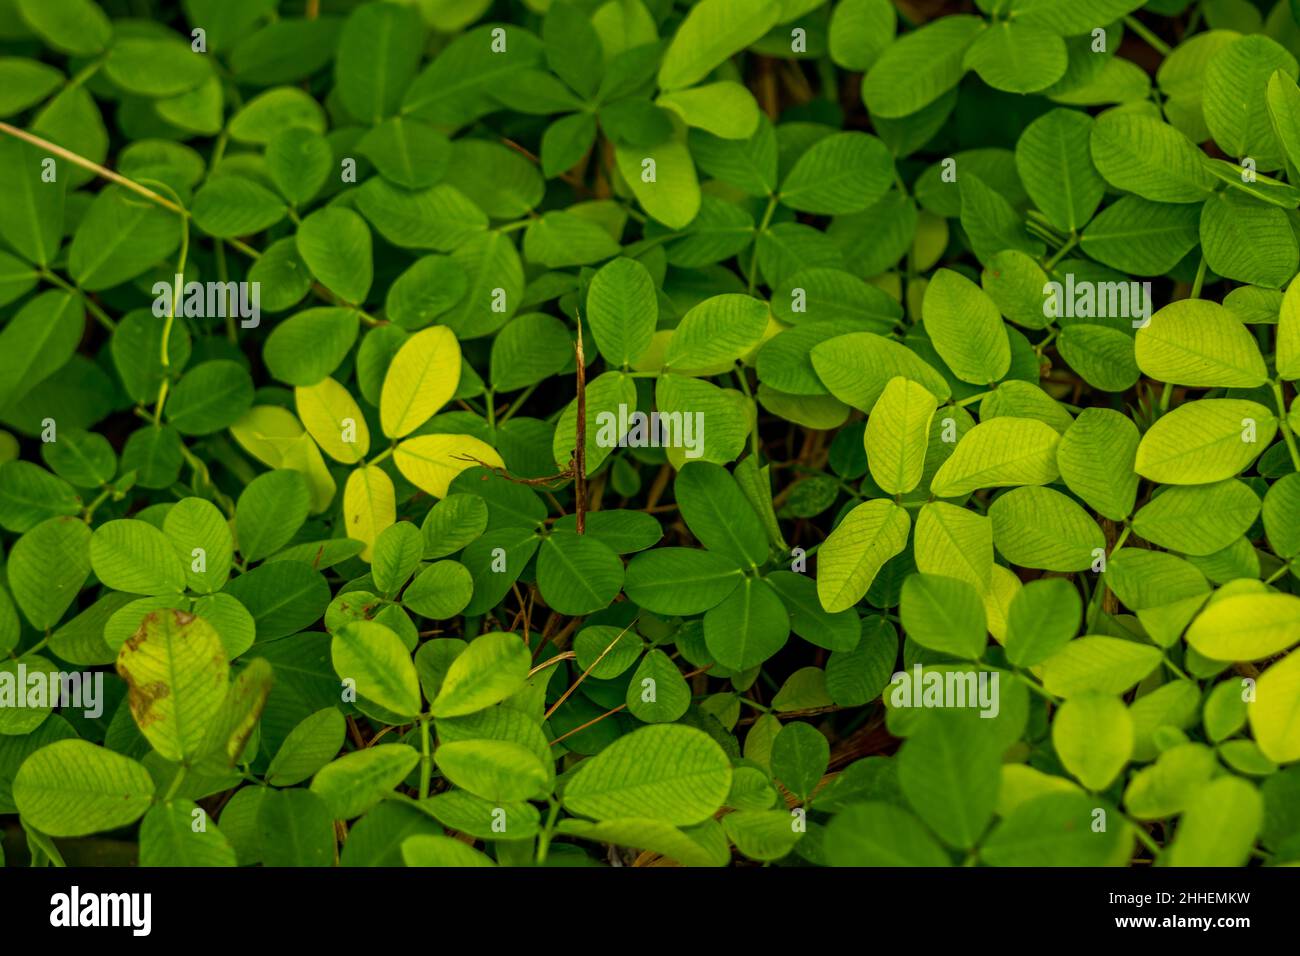 Spread of grass leaves with a type of Pinto peanut (Arachis pintoi Krap. and Greg) is a herbaceous, perennial legume, exclusively native to Brazil Stock Photo